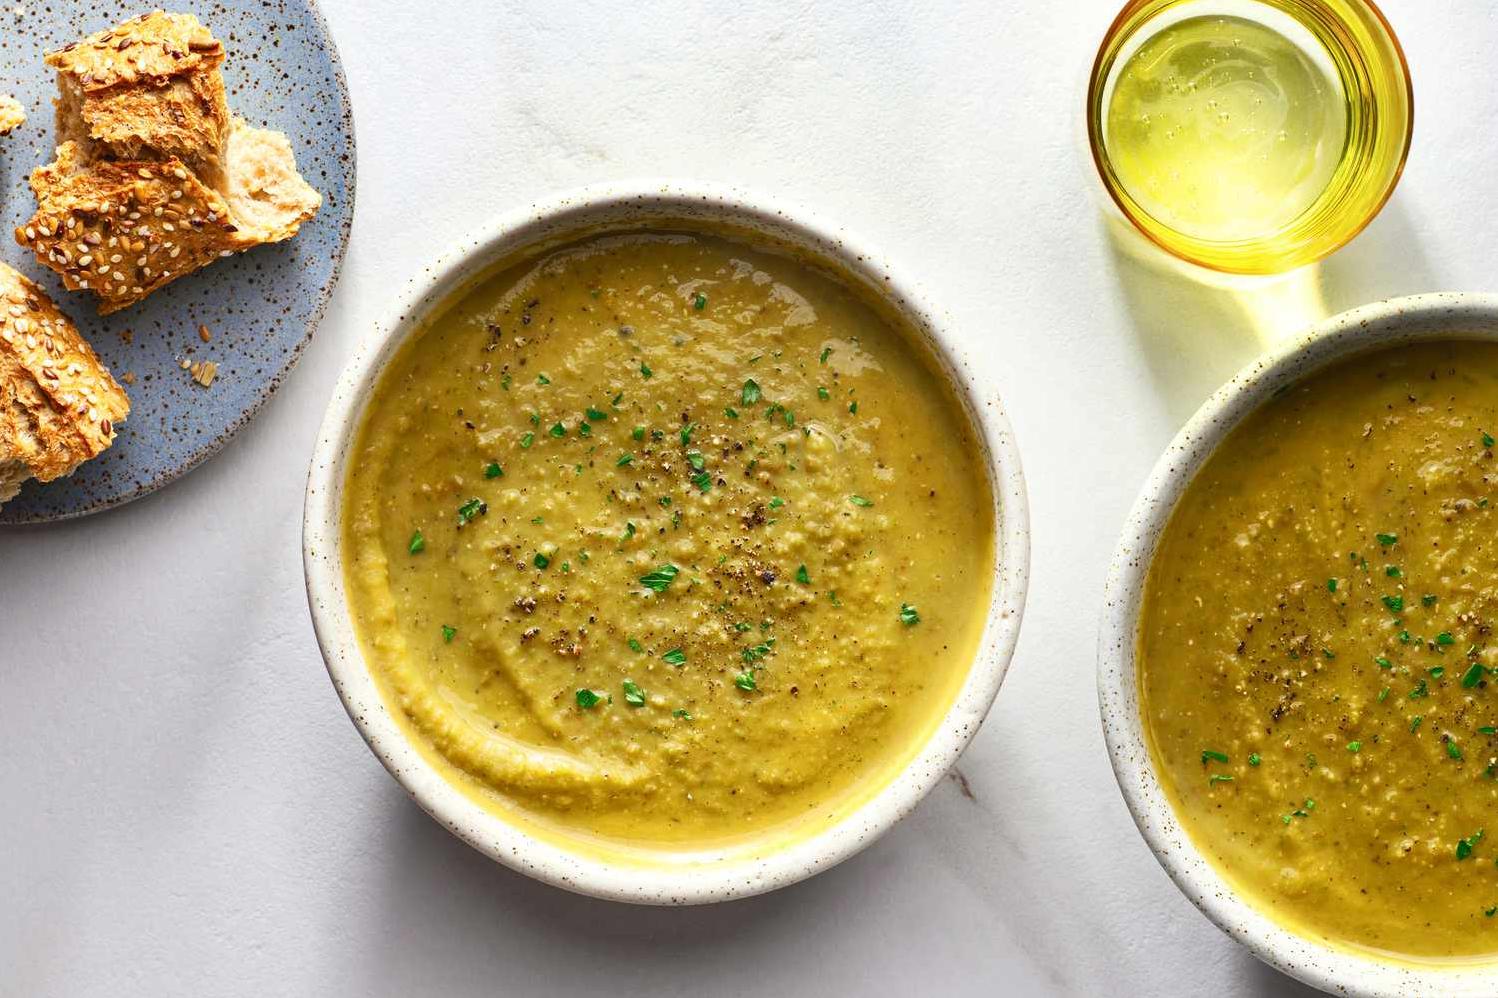  Creamy, delicious, and hearty, this split pea and lentil soup is the perfect comfort food.